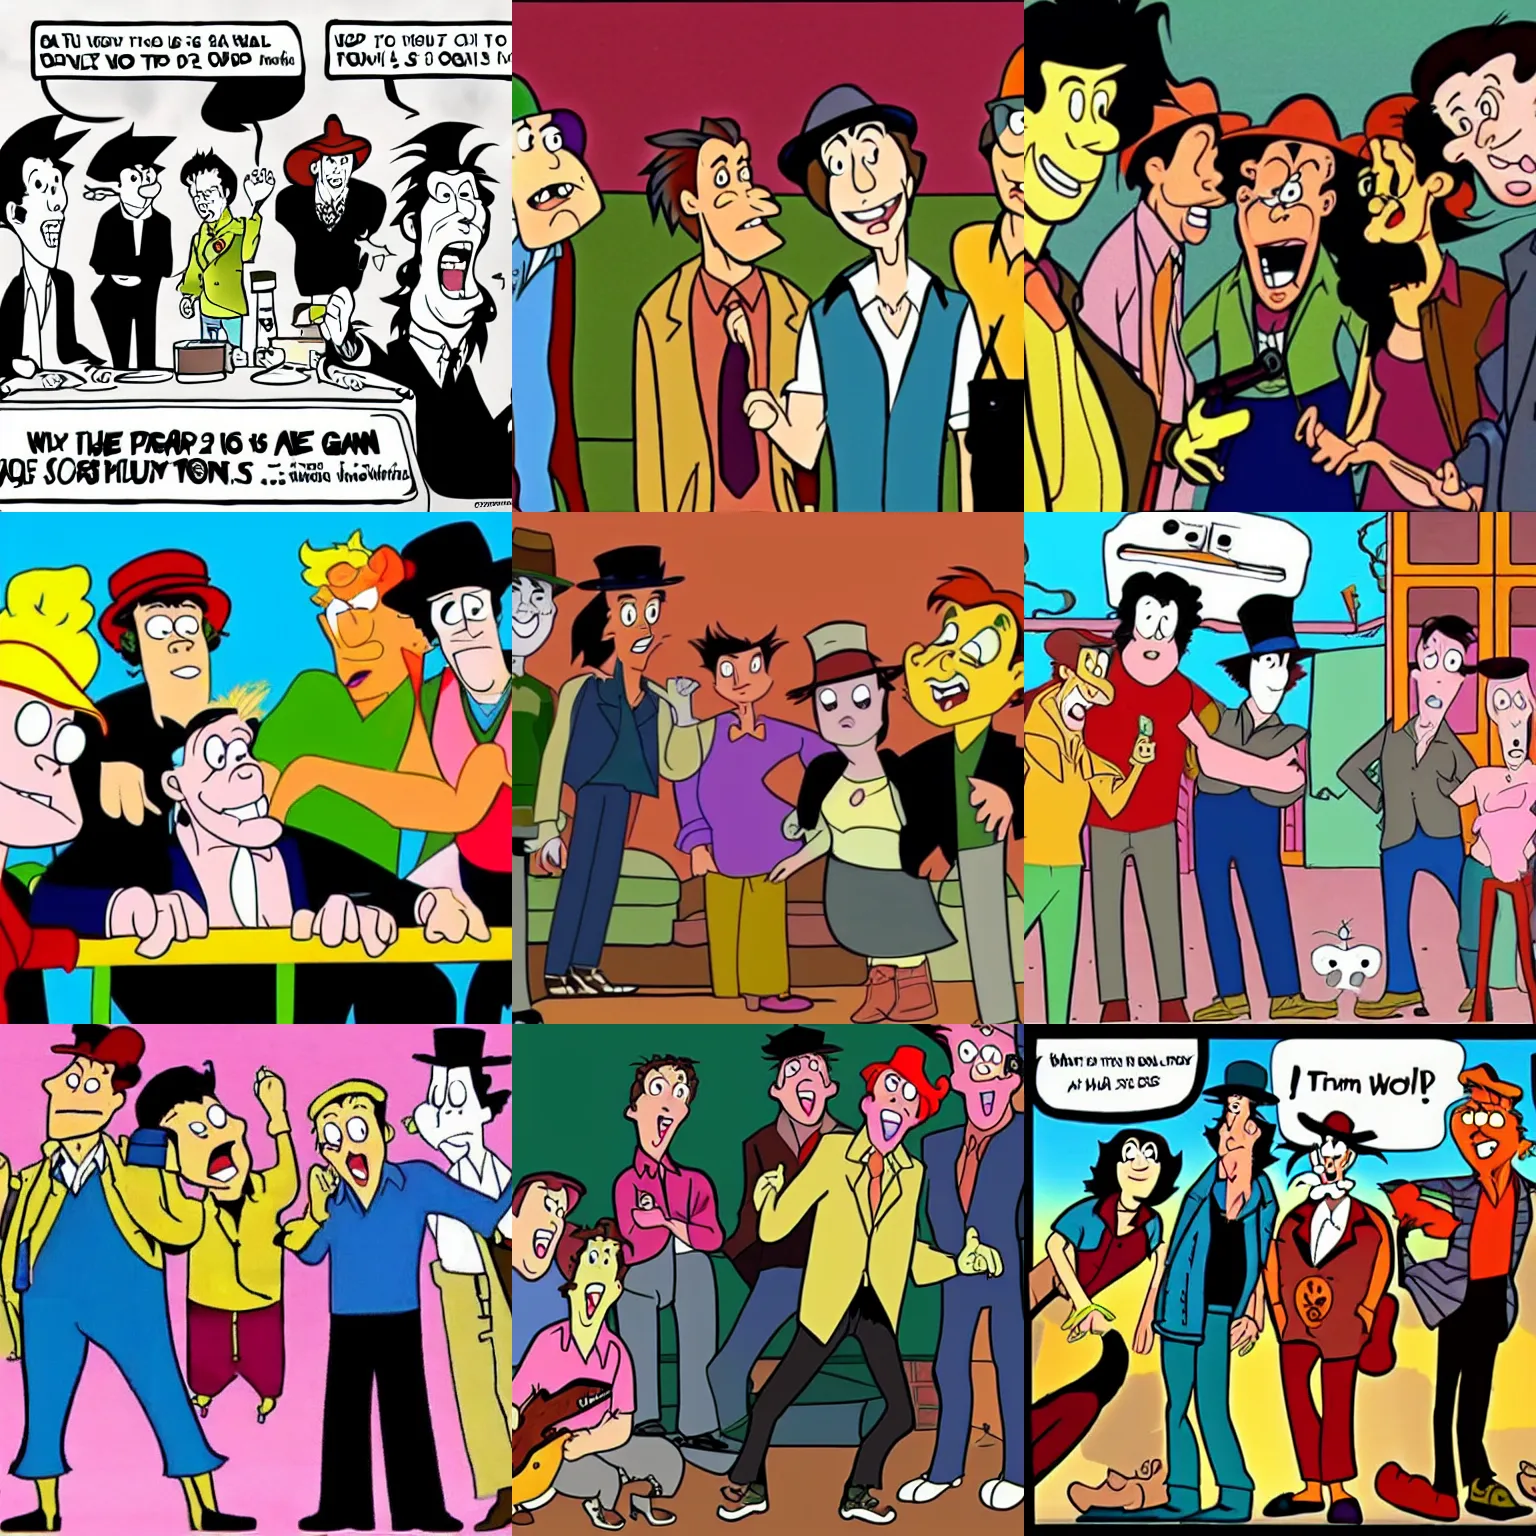 Prompt: Tom Waits meets the gang in a Scooby Do cartoon